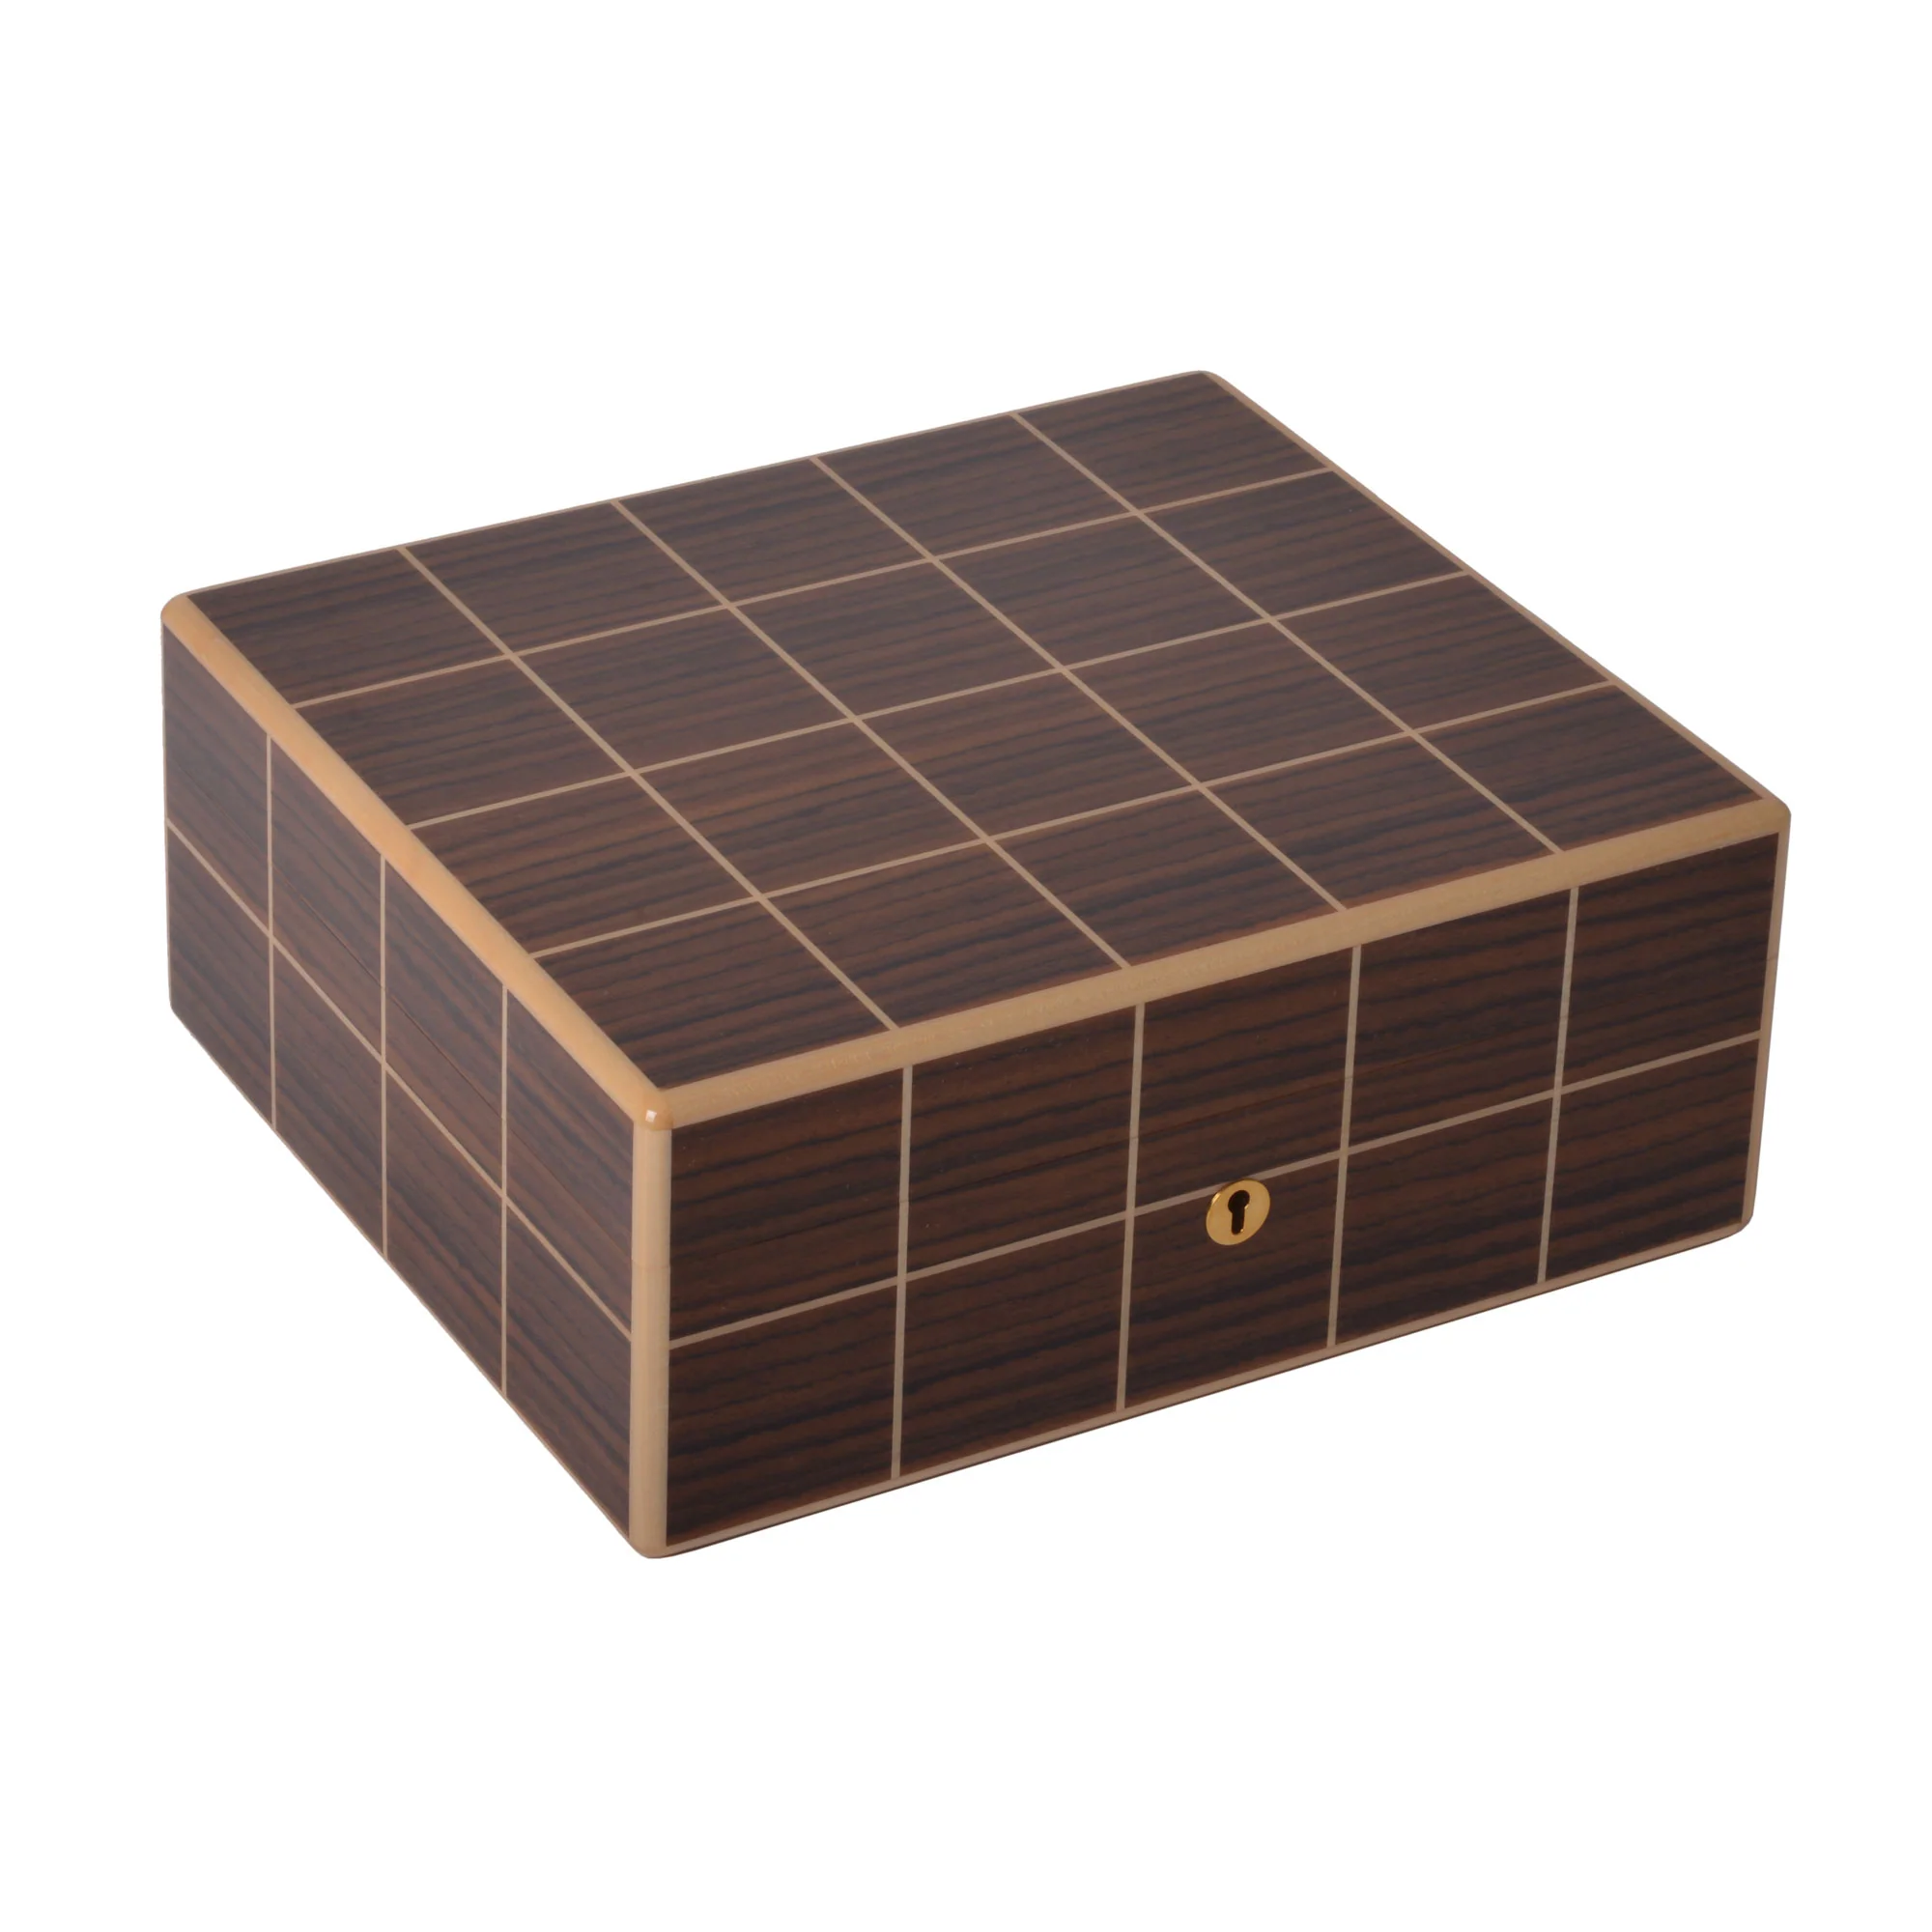 "Quadrillé" - Box for 32 rings or 32 pairs of cufflinks